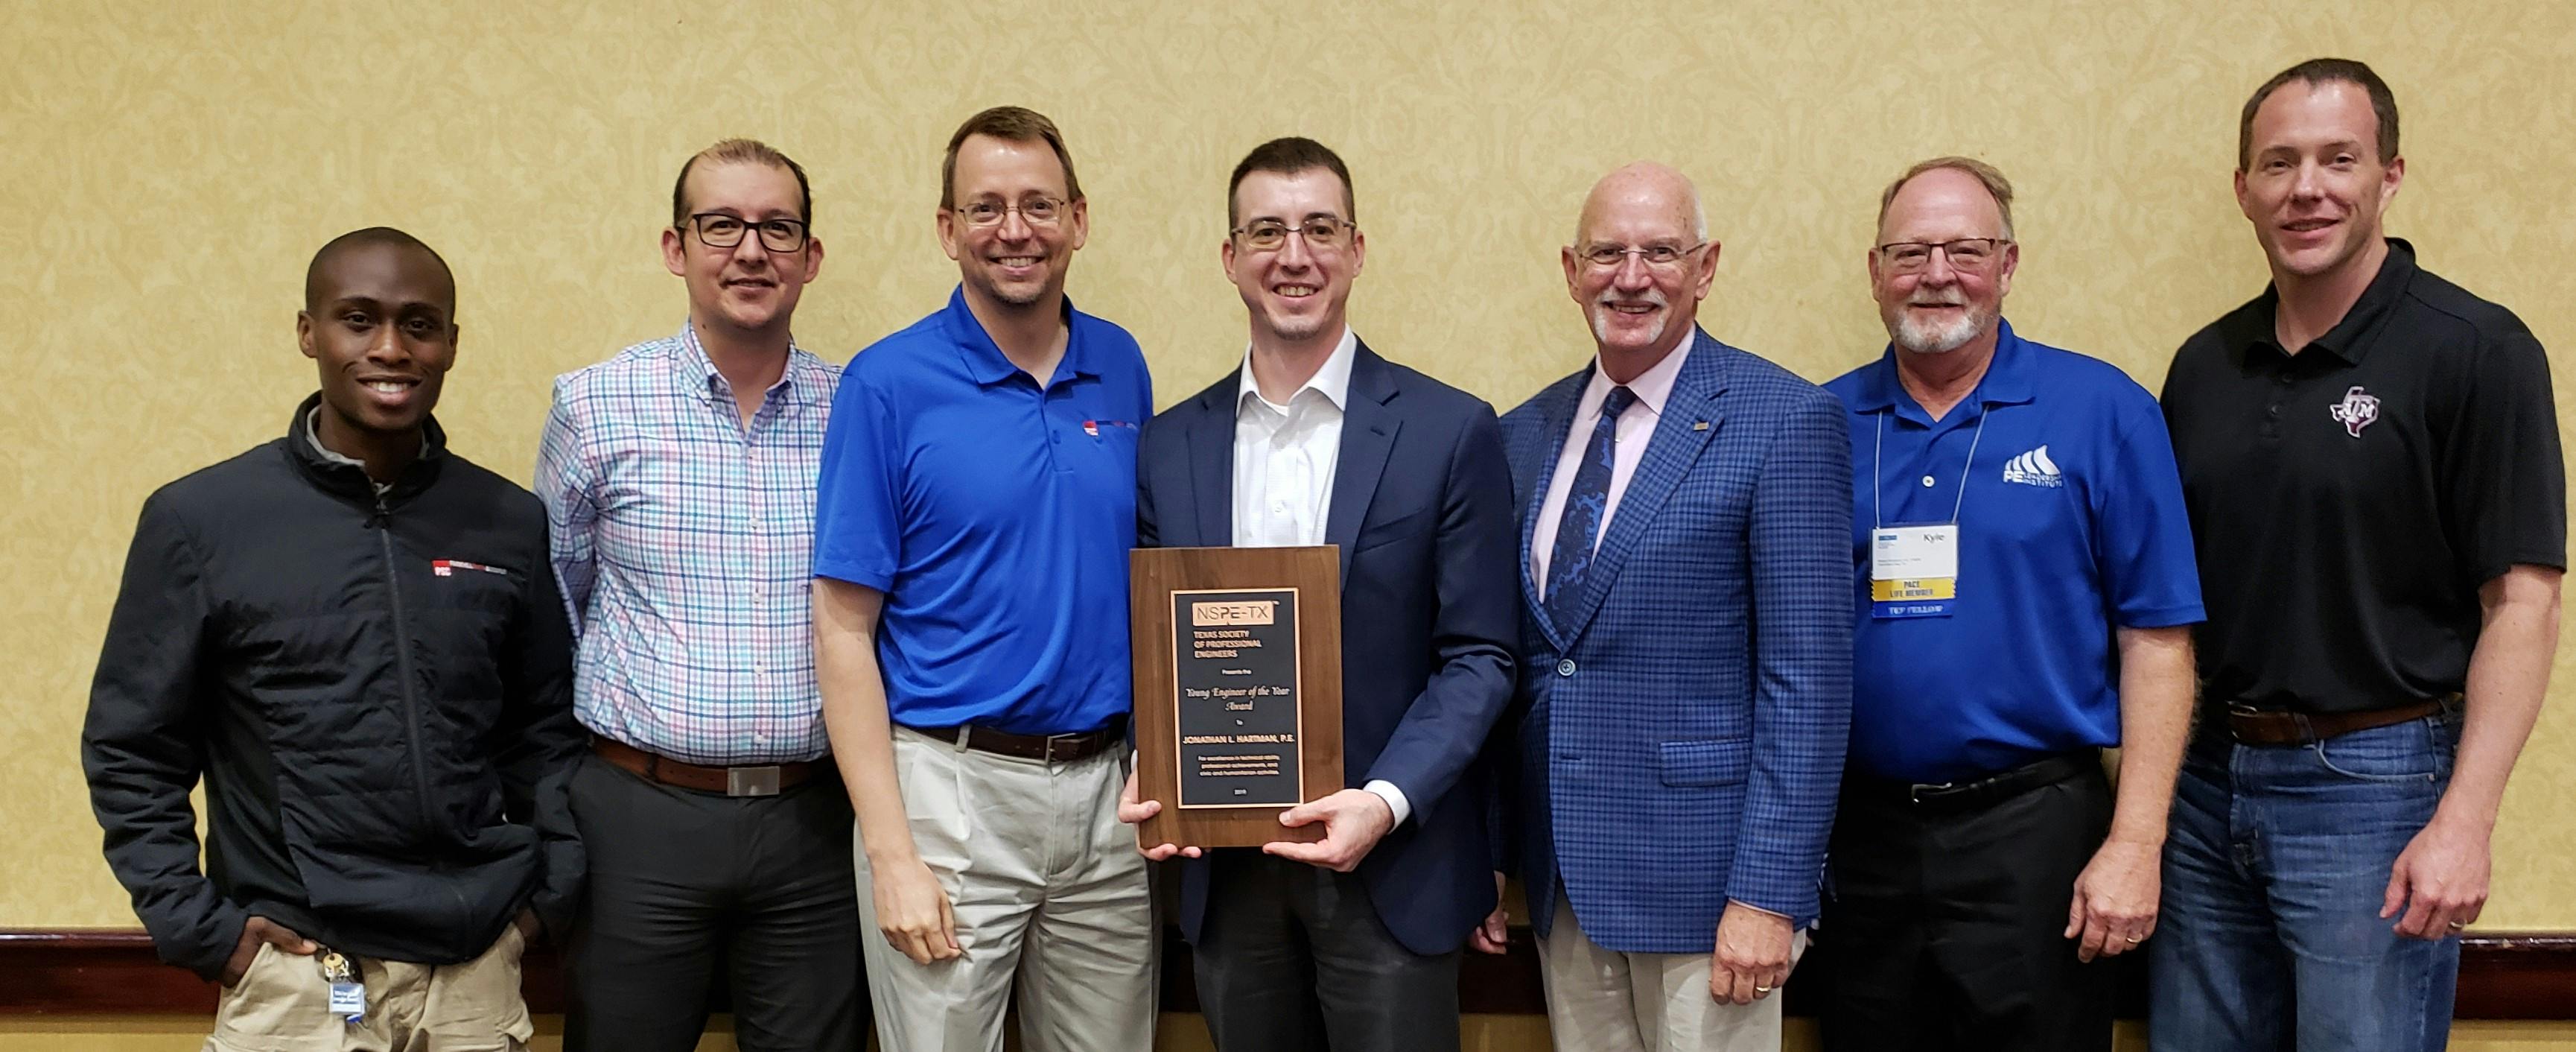 Hartman Named Texas Society of Professional Engineers Young Engineer of the Year cover image